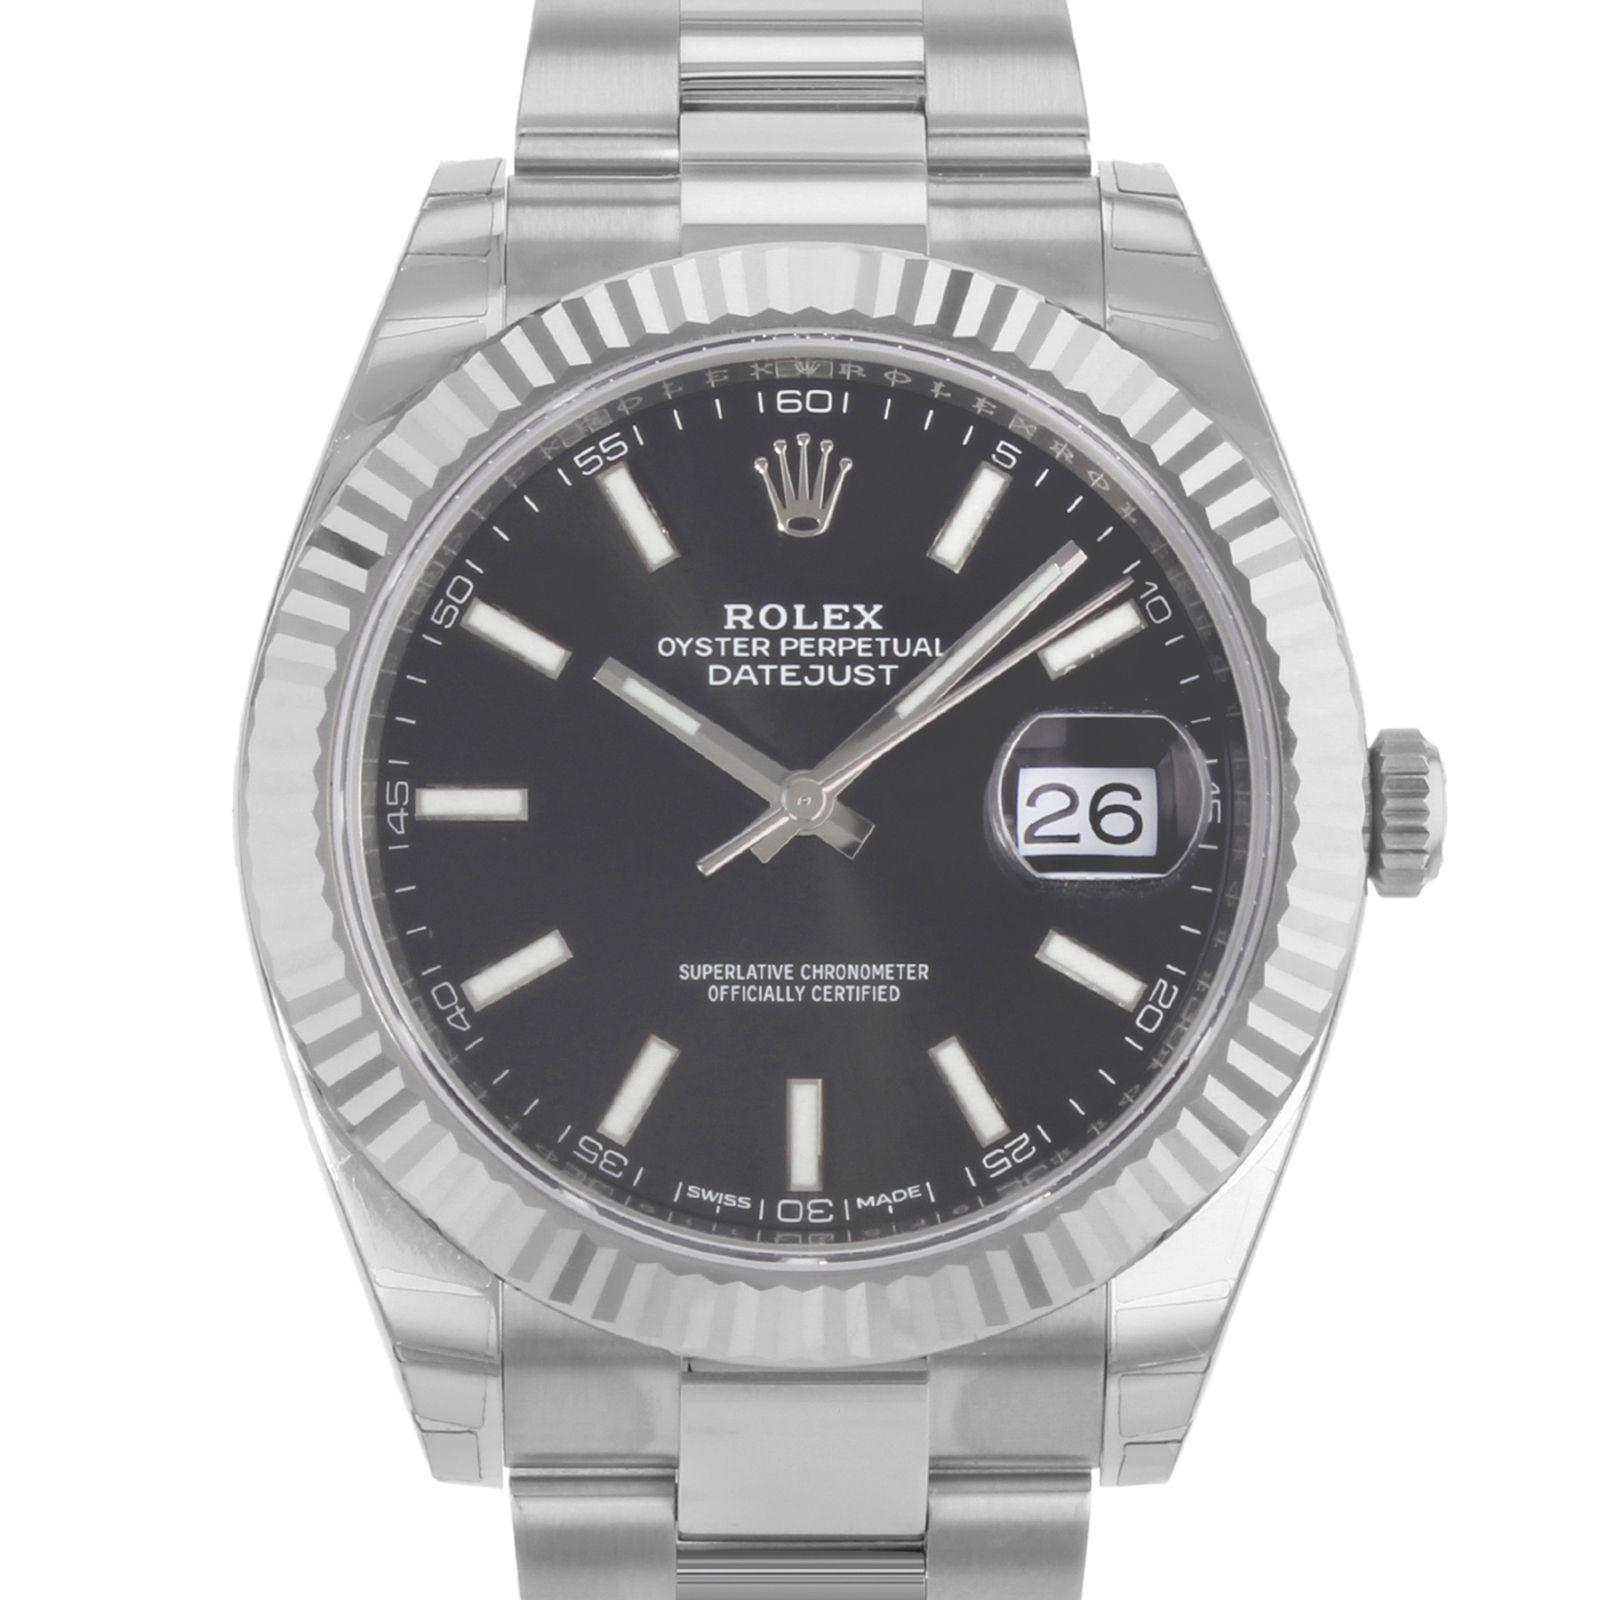 (16487)
This brand new Rolex Datejust 41 126334 is a beautiful men's timepiece that is powered by an automatic movement which is cased in a stainless steel case. It has a round shape face, date dial and has hand sticks style markers. It is completed